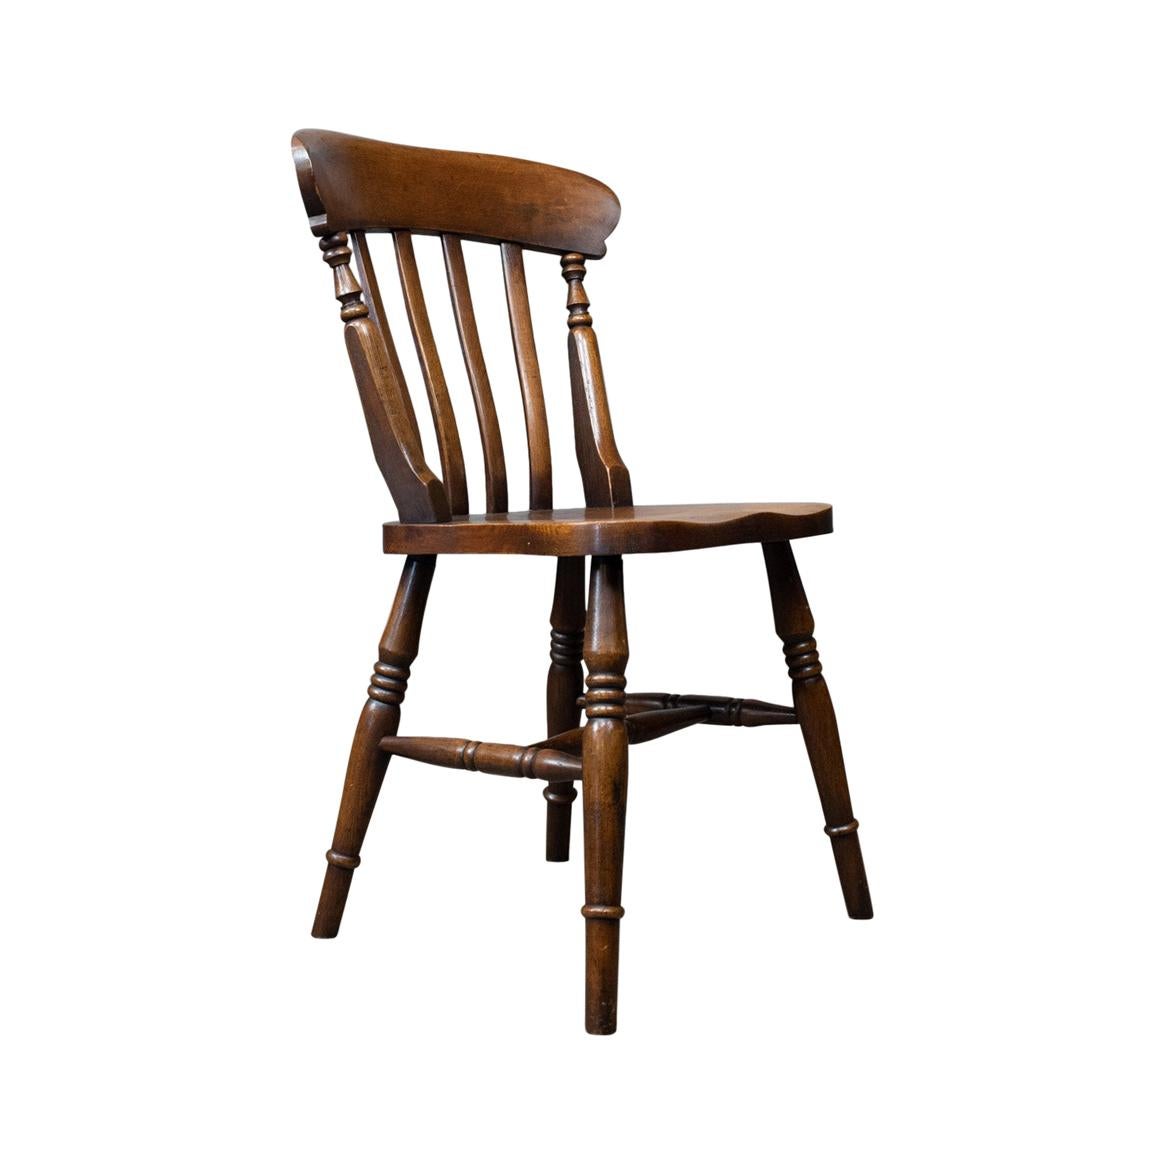 Set of Four Antique Station Chairs, English, Oak, Windsor, Dining, circa 1890